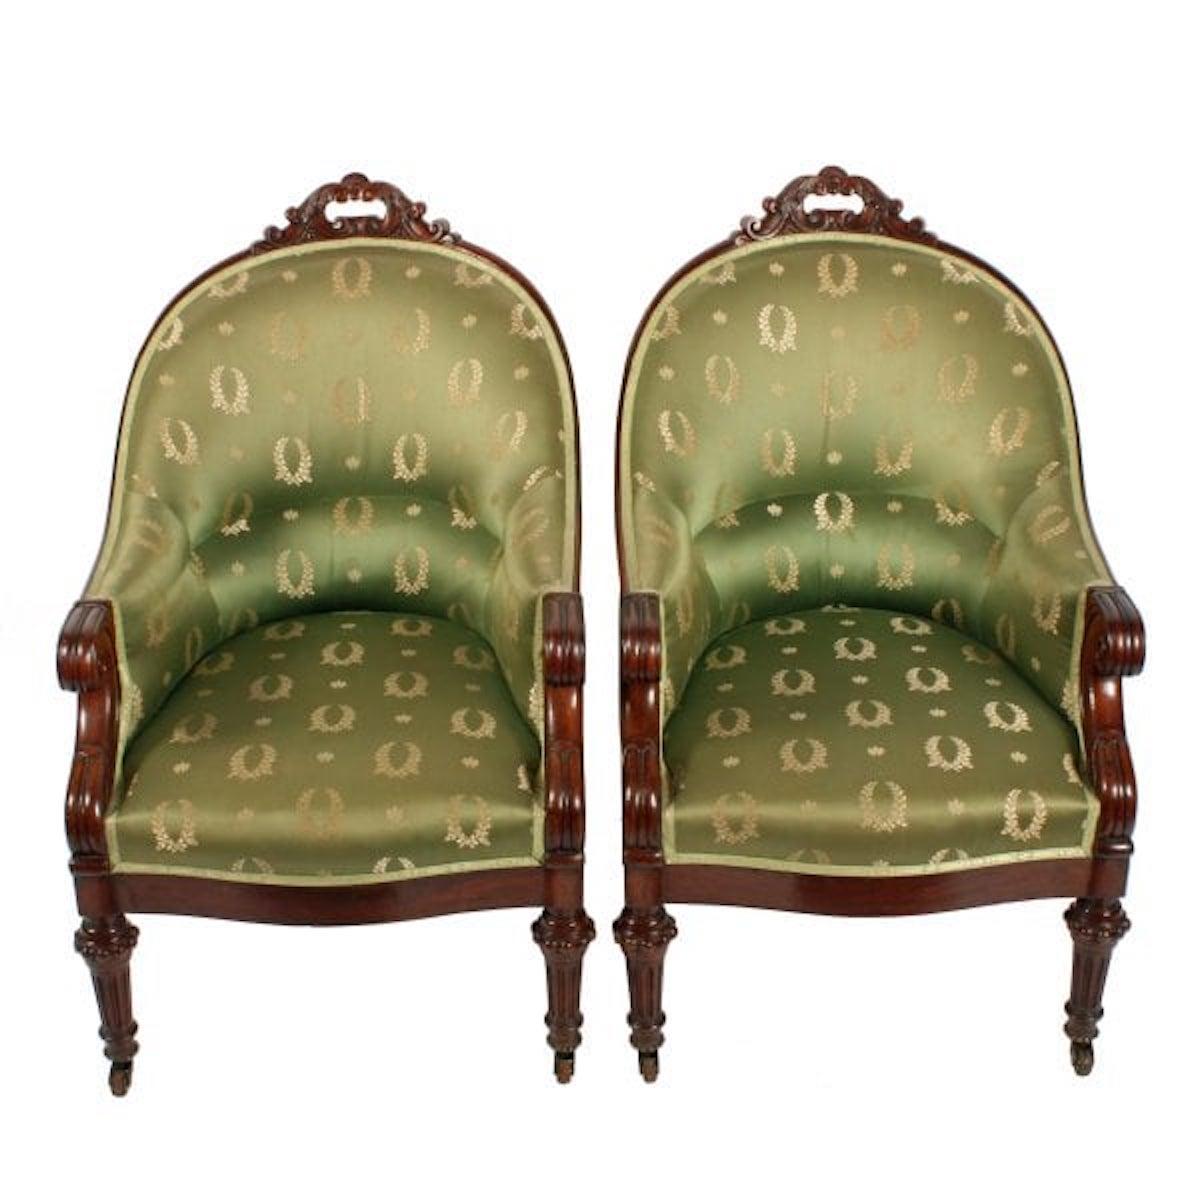 Pair of George IV Library arm chairs

A pair of early 19th century George IV mahogany library arm chairs.

The chairs have a high curved back with a carved scroll decoration to the top.

The chairs have tapering fluted front legs with casters